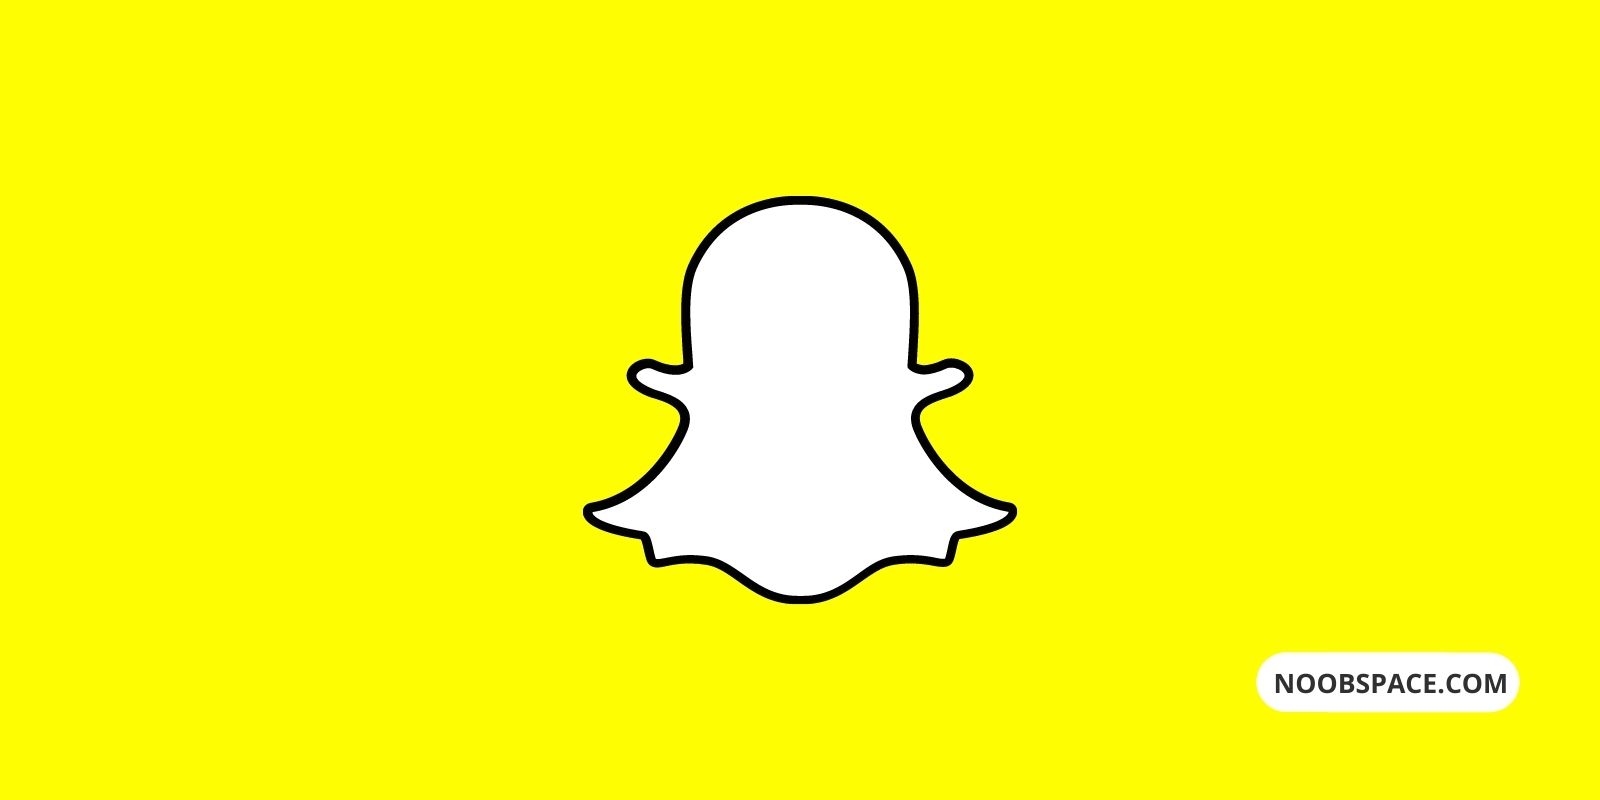 How to screenshot on snapchat without them knowing iPhone